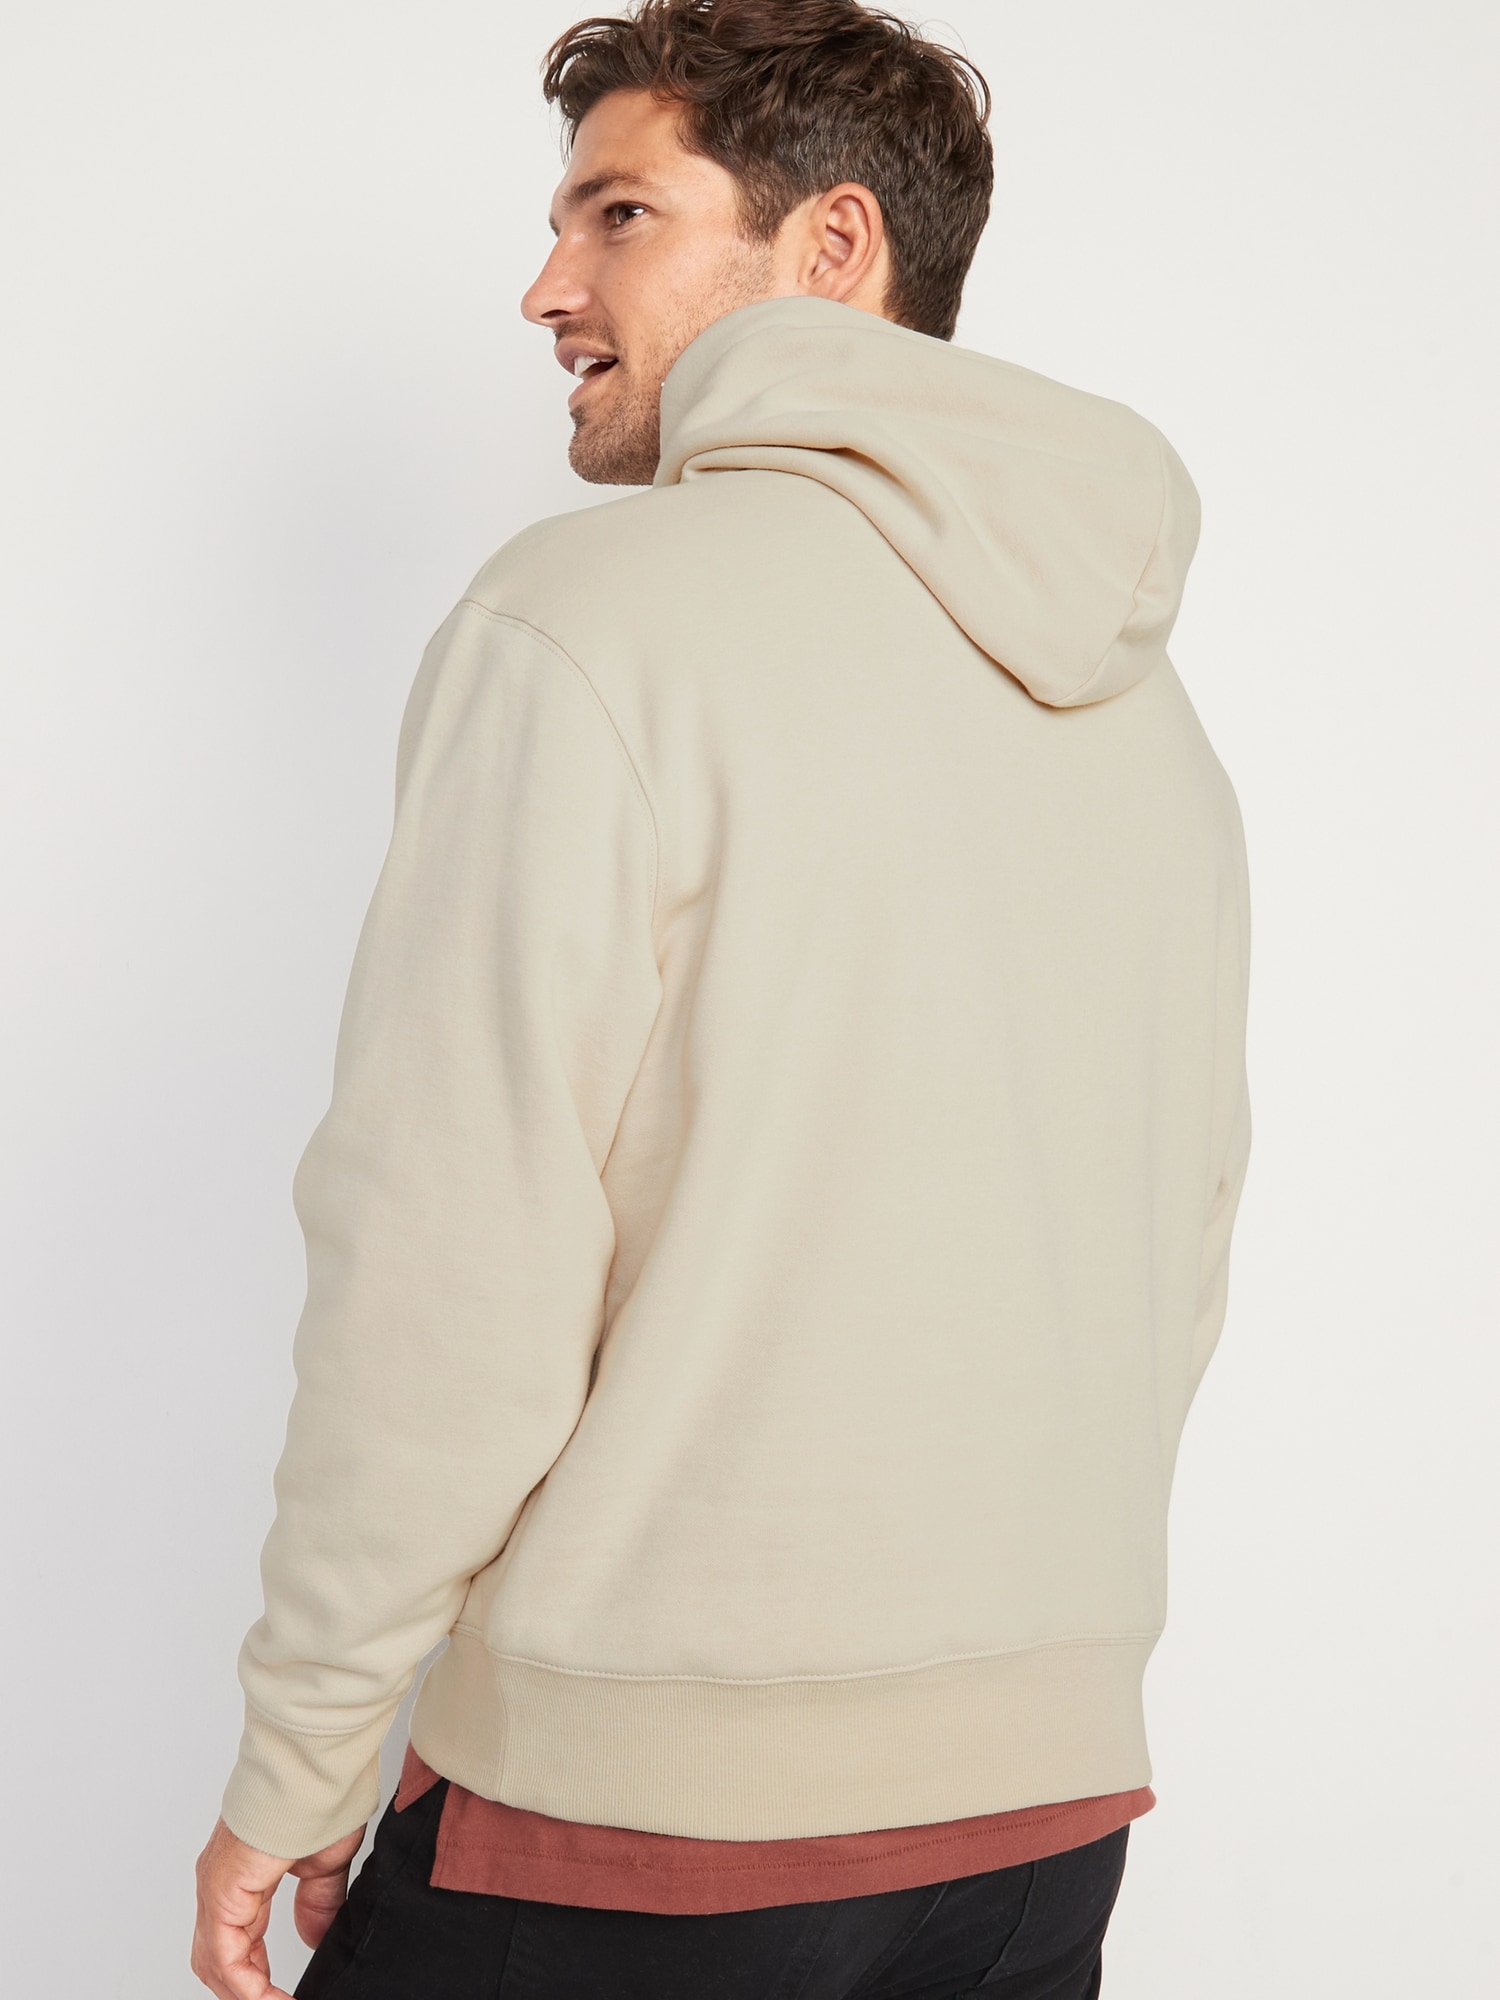 Oversized Thermal-Lined Pullover Hoodie